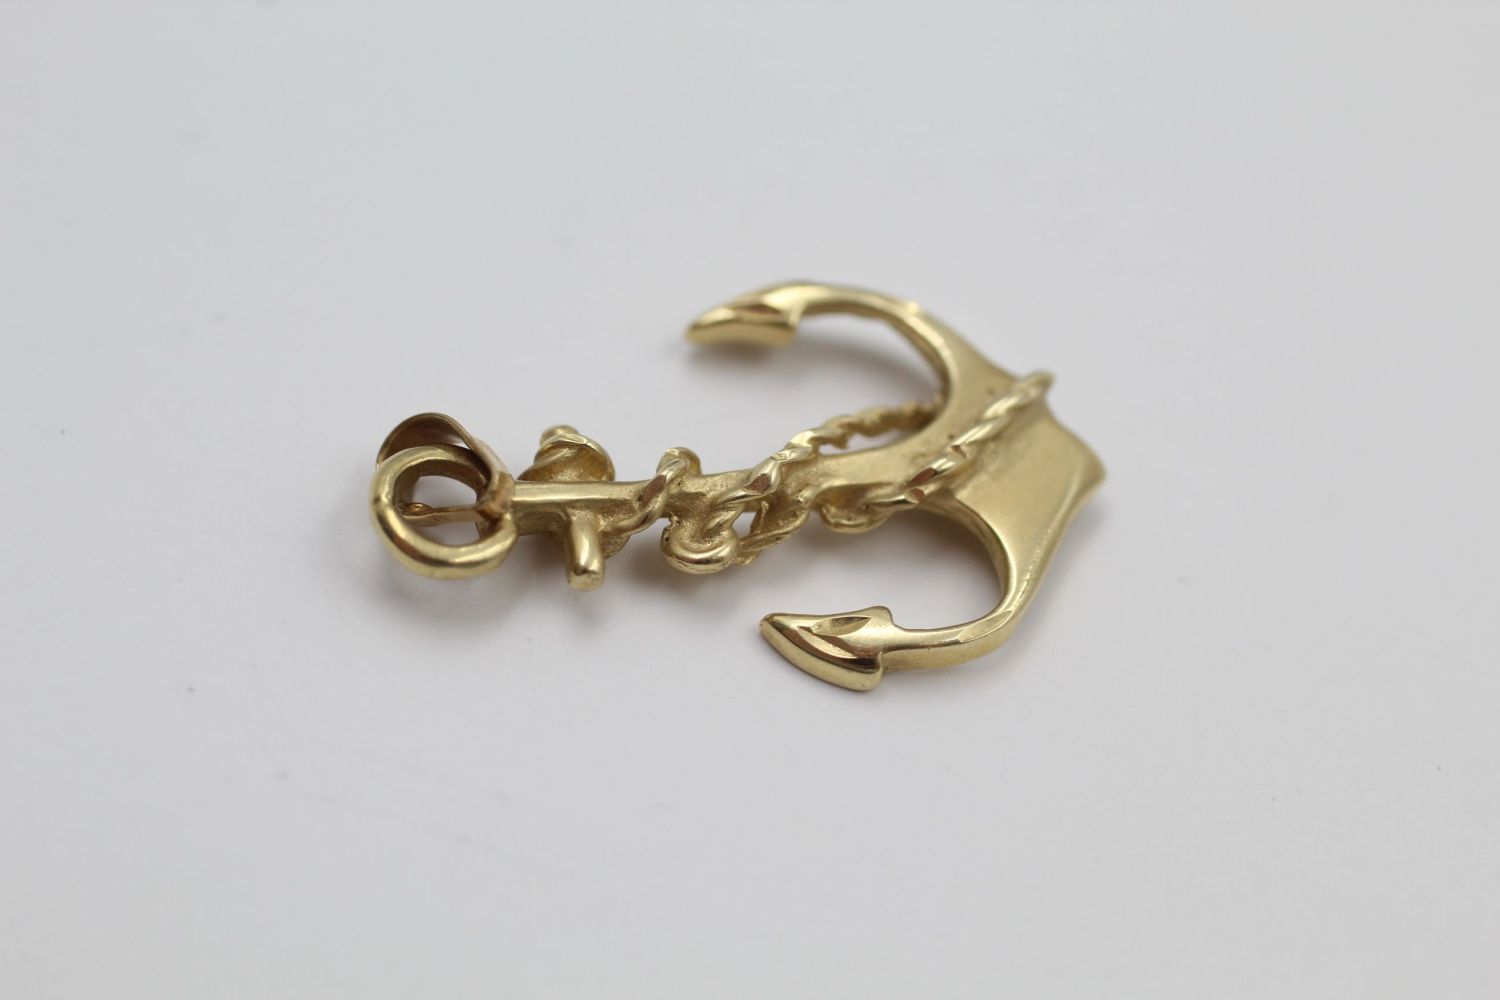 14ct Gold anchor pendant 2 grams gross - Image 4 of 5